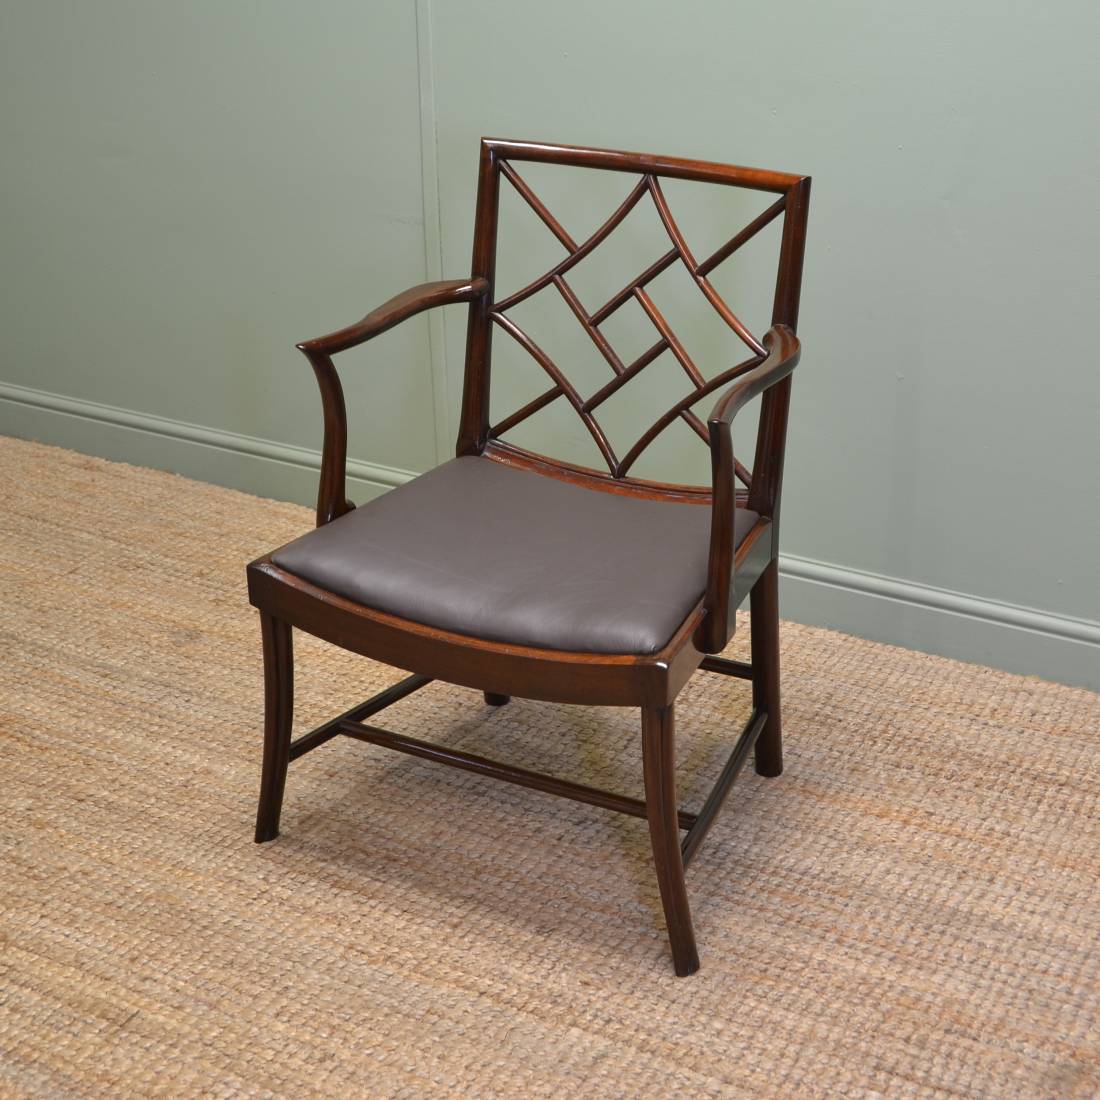 Solid Mahogany Cockpen Antique Desk Chair